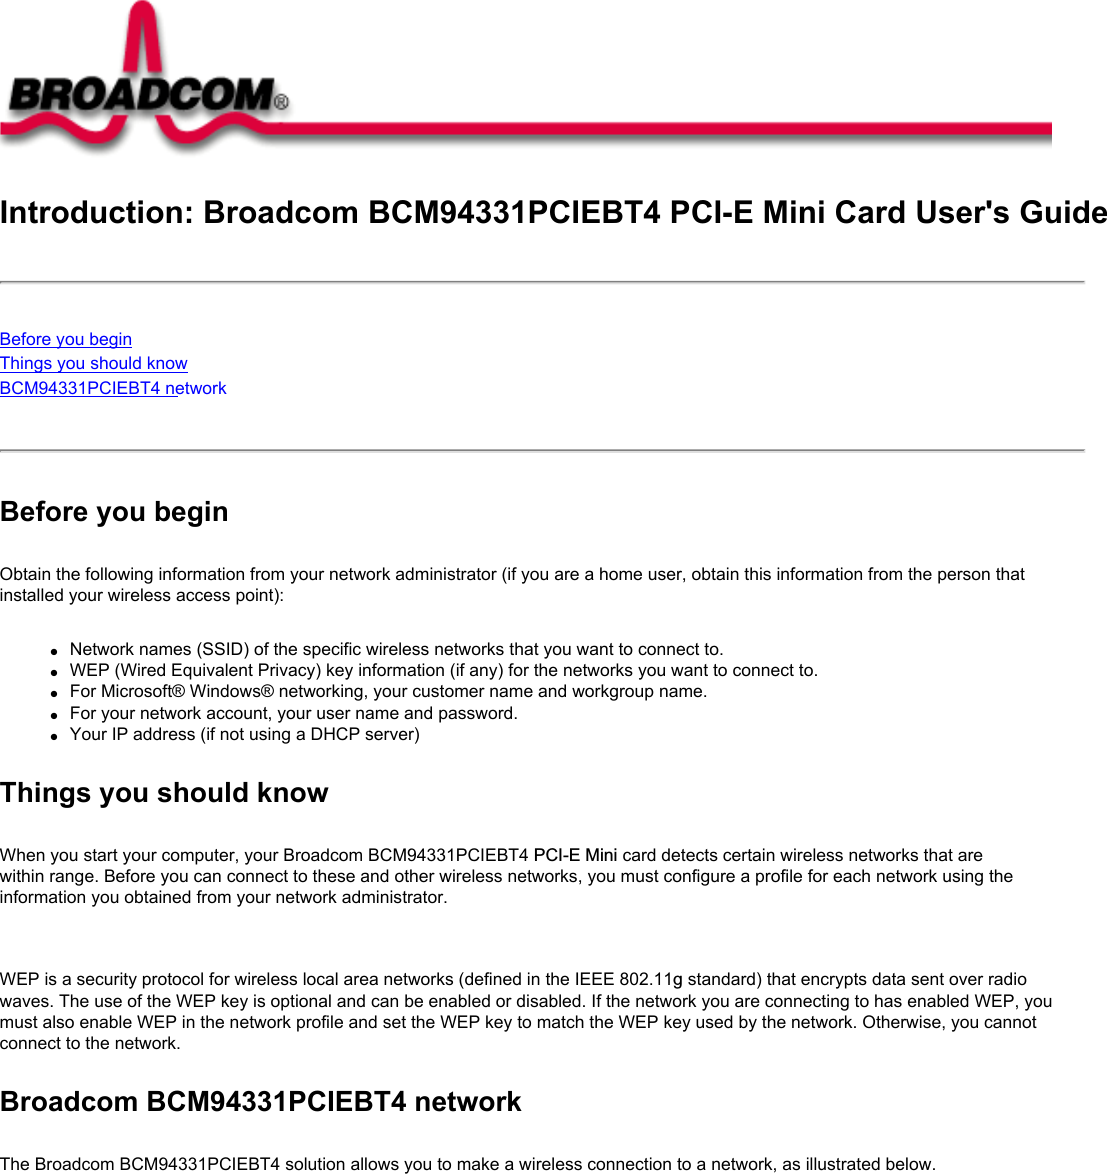 Introduction: Broadcom BCM94331PCIEBT4 PCI-E Mini Card User&apos;s GuideBefore you beginThings you should knowBCM94331PCIEBT4 network Before you beginObtain the following information from your network administrator (if you are a home user, obtain this information from the person that installed your wireless access point):●     Network names (SSID) of the specific wireless networks that you want to connect to.●     WEP (Wired Equivalent Privacy) key information (if any) for the networks you want to connect to.●     For Microsoft® Windows® networking, your customer name and workgroup name.●     For your network account, your user name and password.●     Your IP address (if not using a DHCP server)Things you should knowWhen you start your computer, your Broadcom BCM94331PCIEBT4 PCI-E Mini card detects certain wireless networks that are within range. Before you can connect to these and other wireless networks, you must configure a profile for each network using the information you obtained from your network administrator.   WEP is a security protocol for wireless local area networks (defined in the IEEE 802.11g standard) that encrypts data sent over radio waves. The use of the WEP key is optional and can be enabled or disabled. If the network you are connecting to has enabled WEP, you must also enable WEP in the network profile and set the WEP key to match the WEP key used by the network. Otherwise, you cannot connect to the network.Broadcom BCM94331PCIEBT4 networkThe Broadcom BCM94331PCIEBT4 solution allows you to make a wireless connection to a network, as illustrated below.